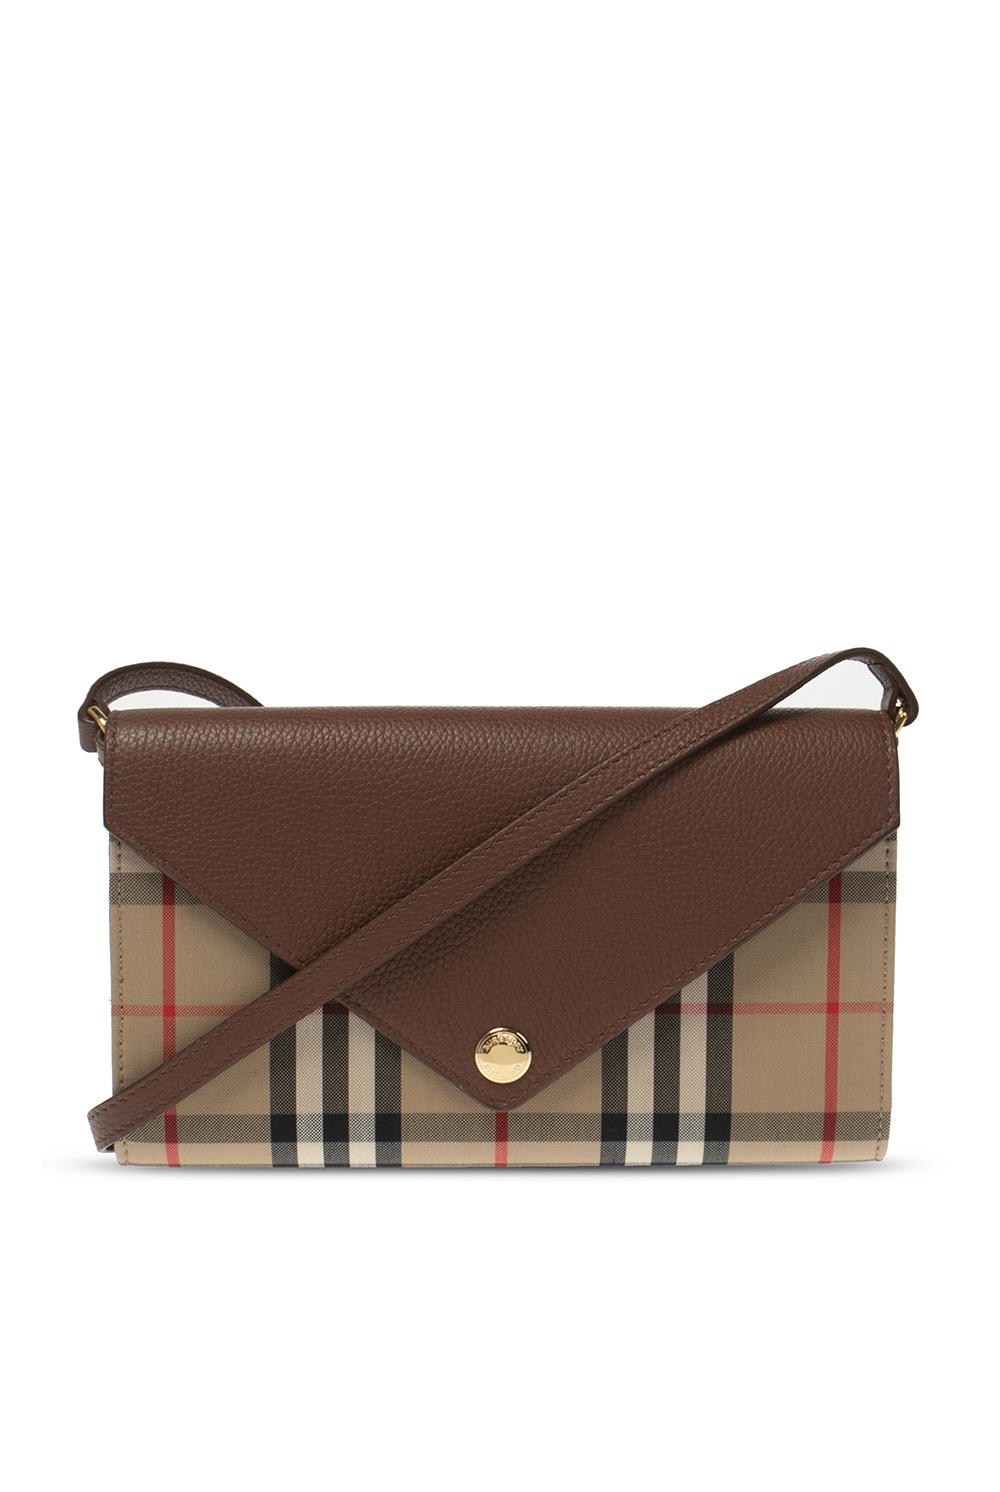 Burberry Wallet with shoulder strap